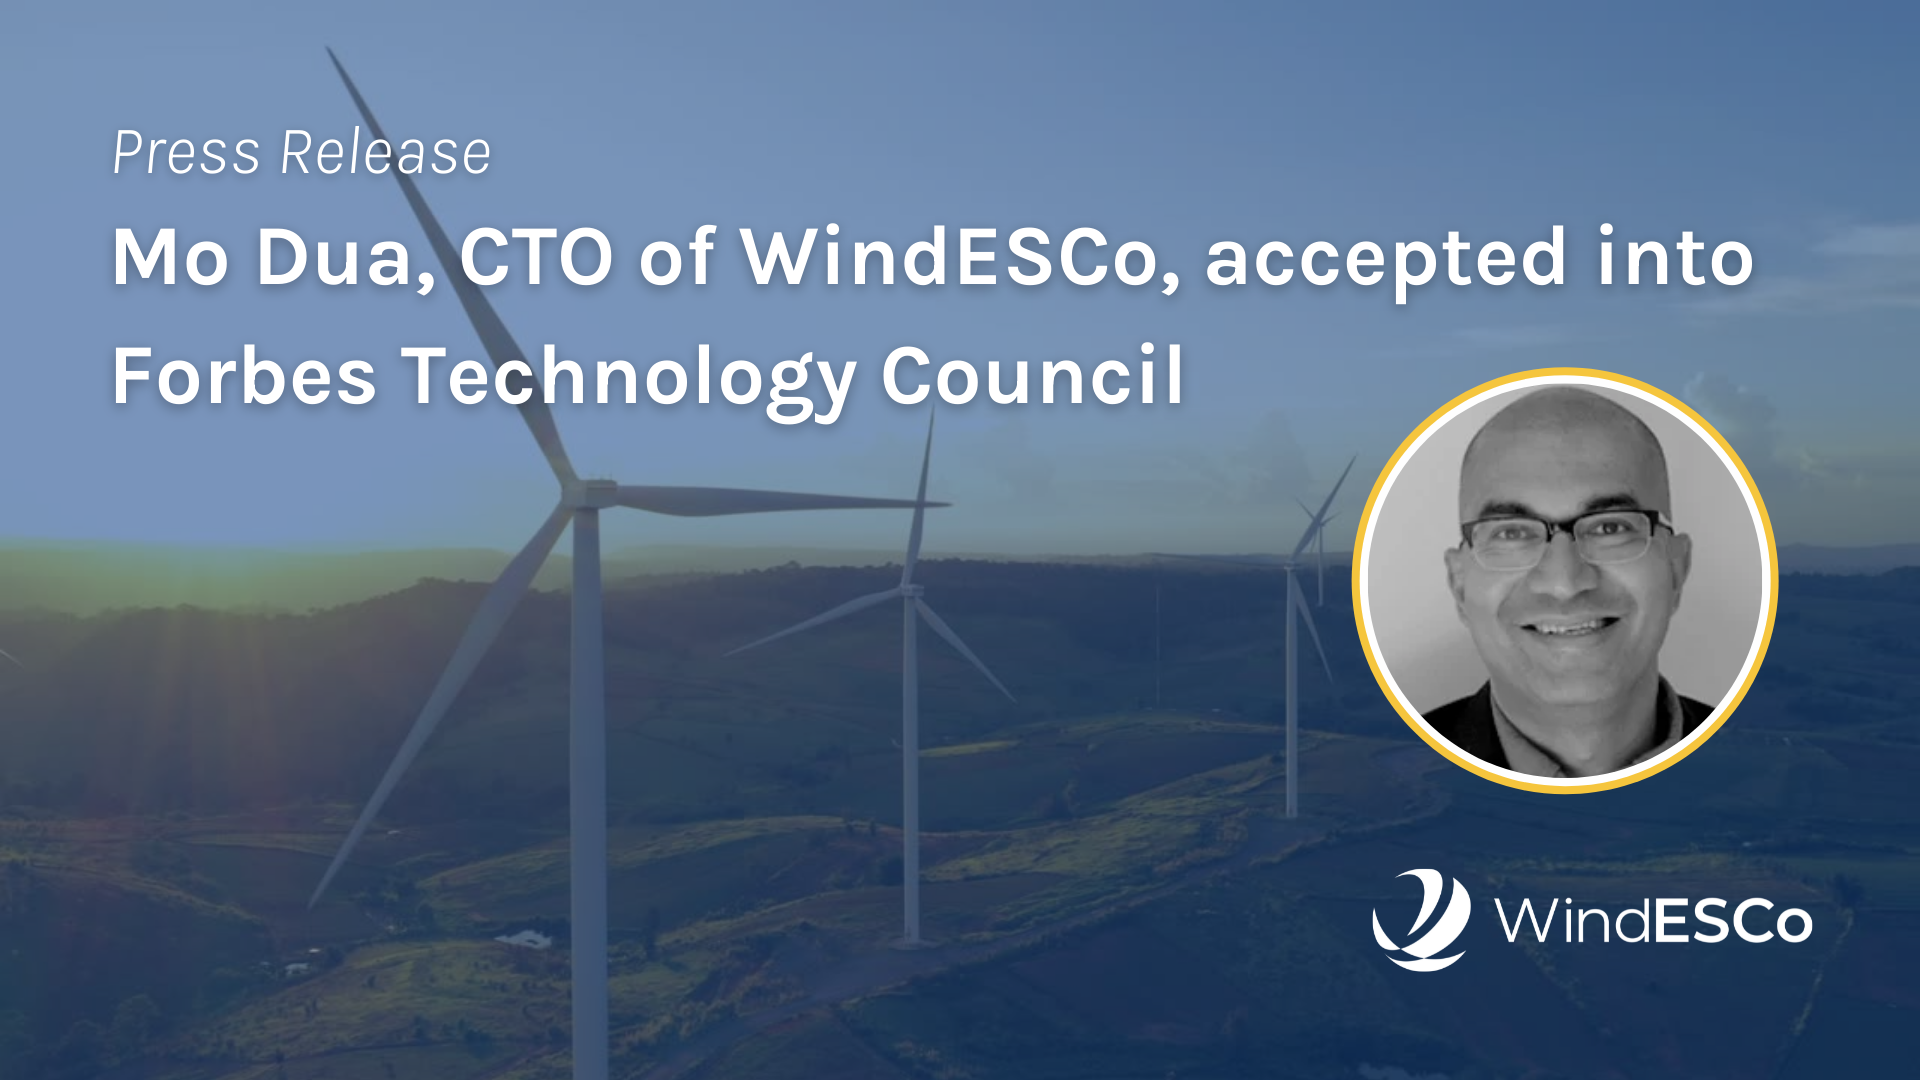 WindESCo CTO accepted into Forbes Technology Council